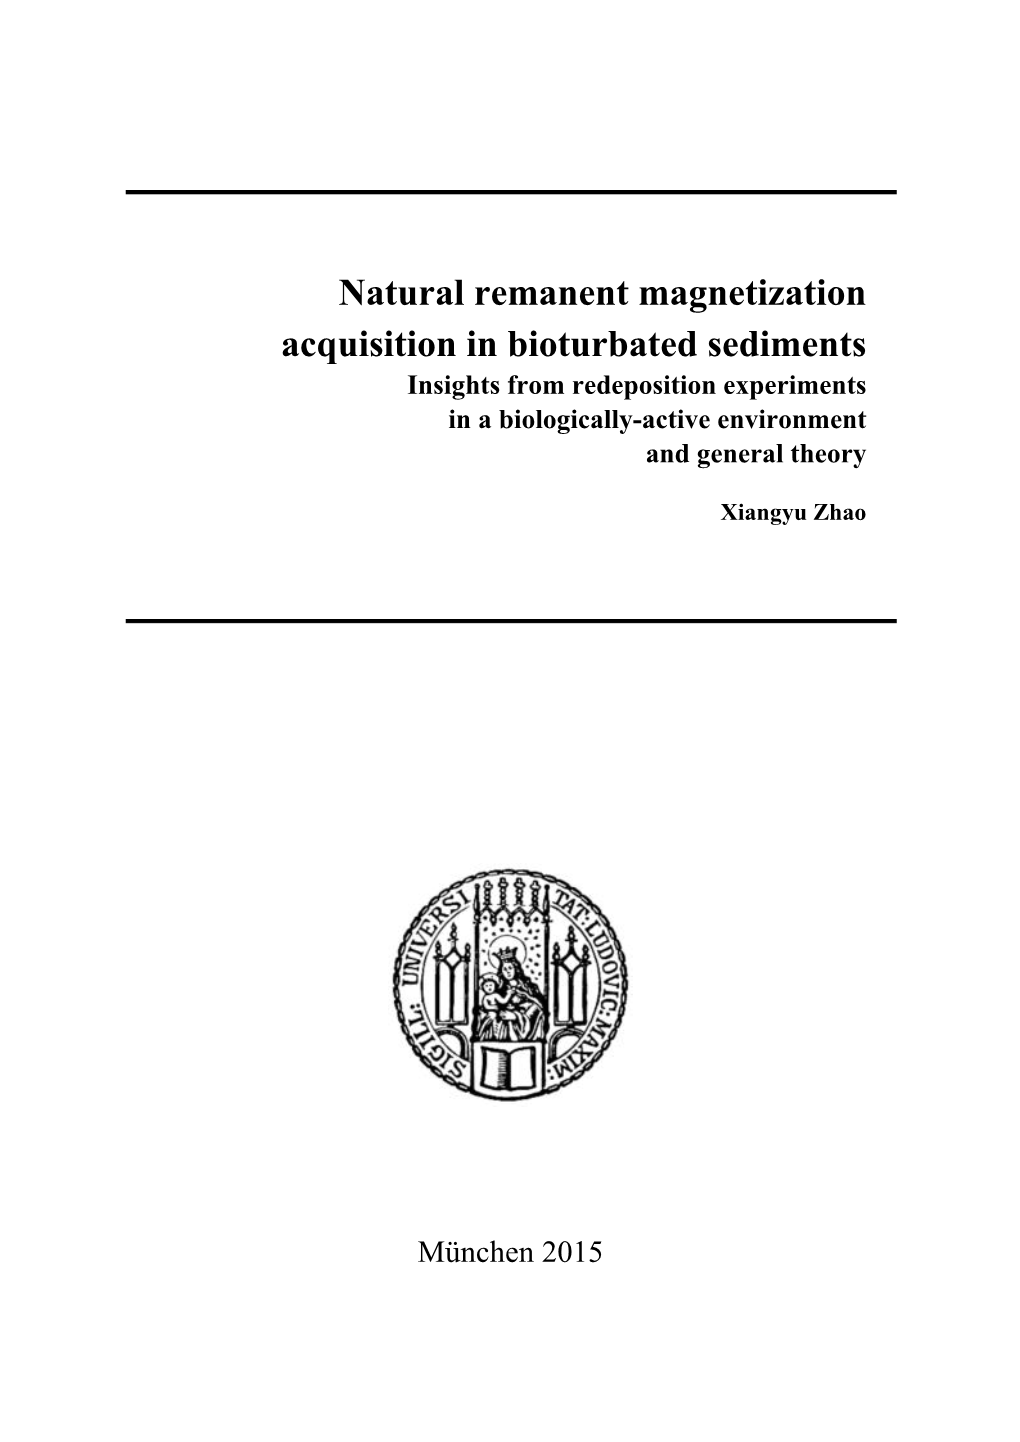 Natural Remanent Magnetization Acquisition in Bioturbated Sediments -- Insights from Redeposition Experiments in a Biologically